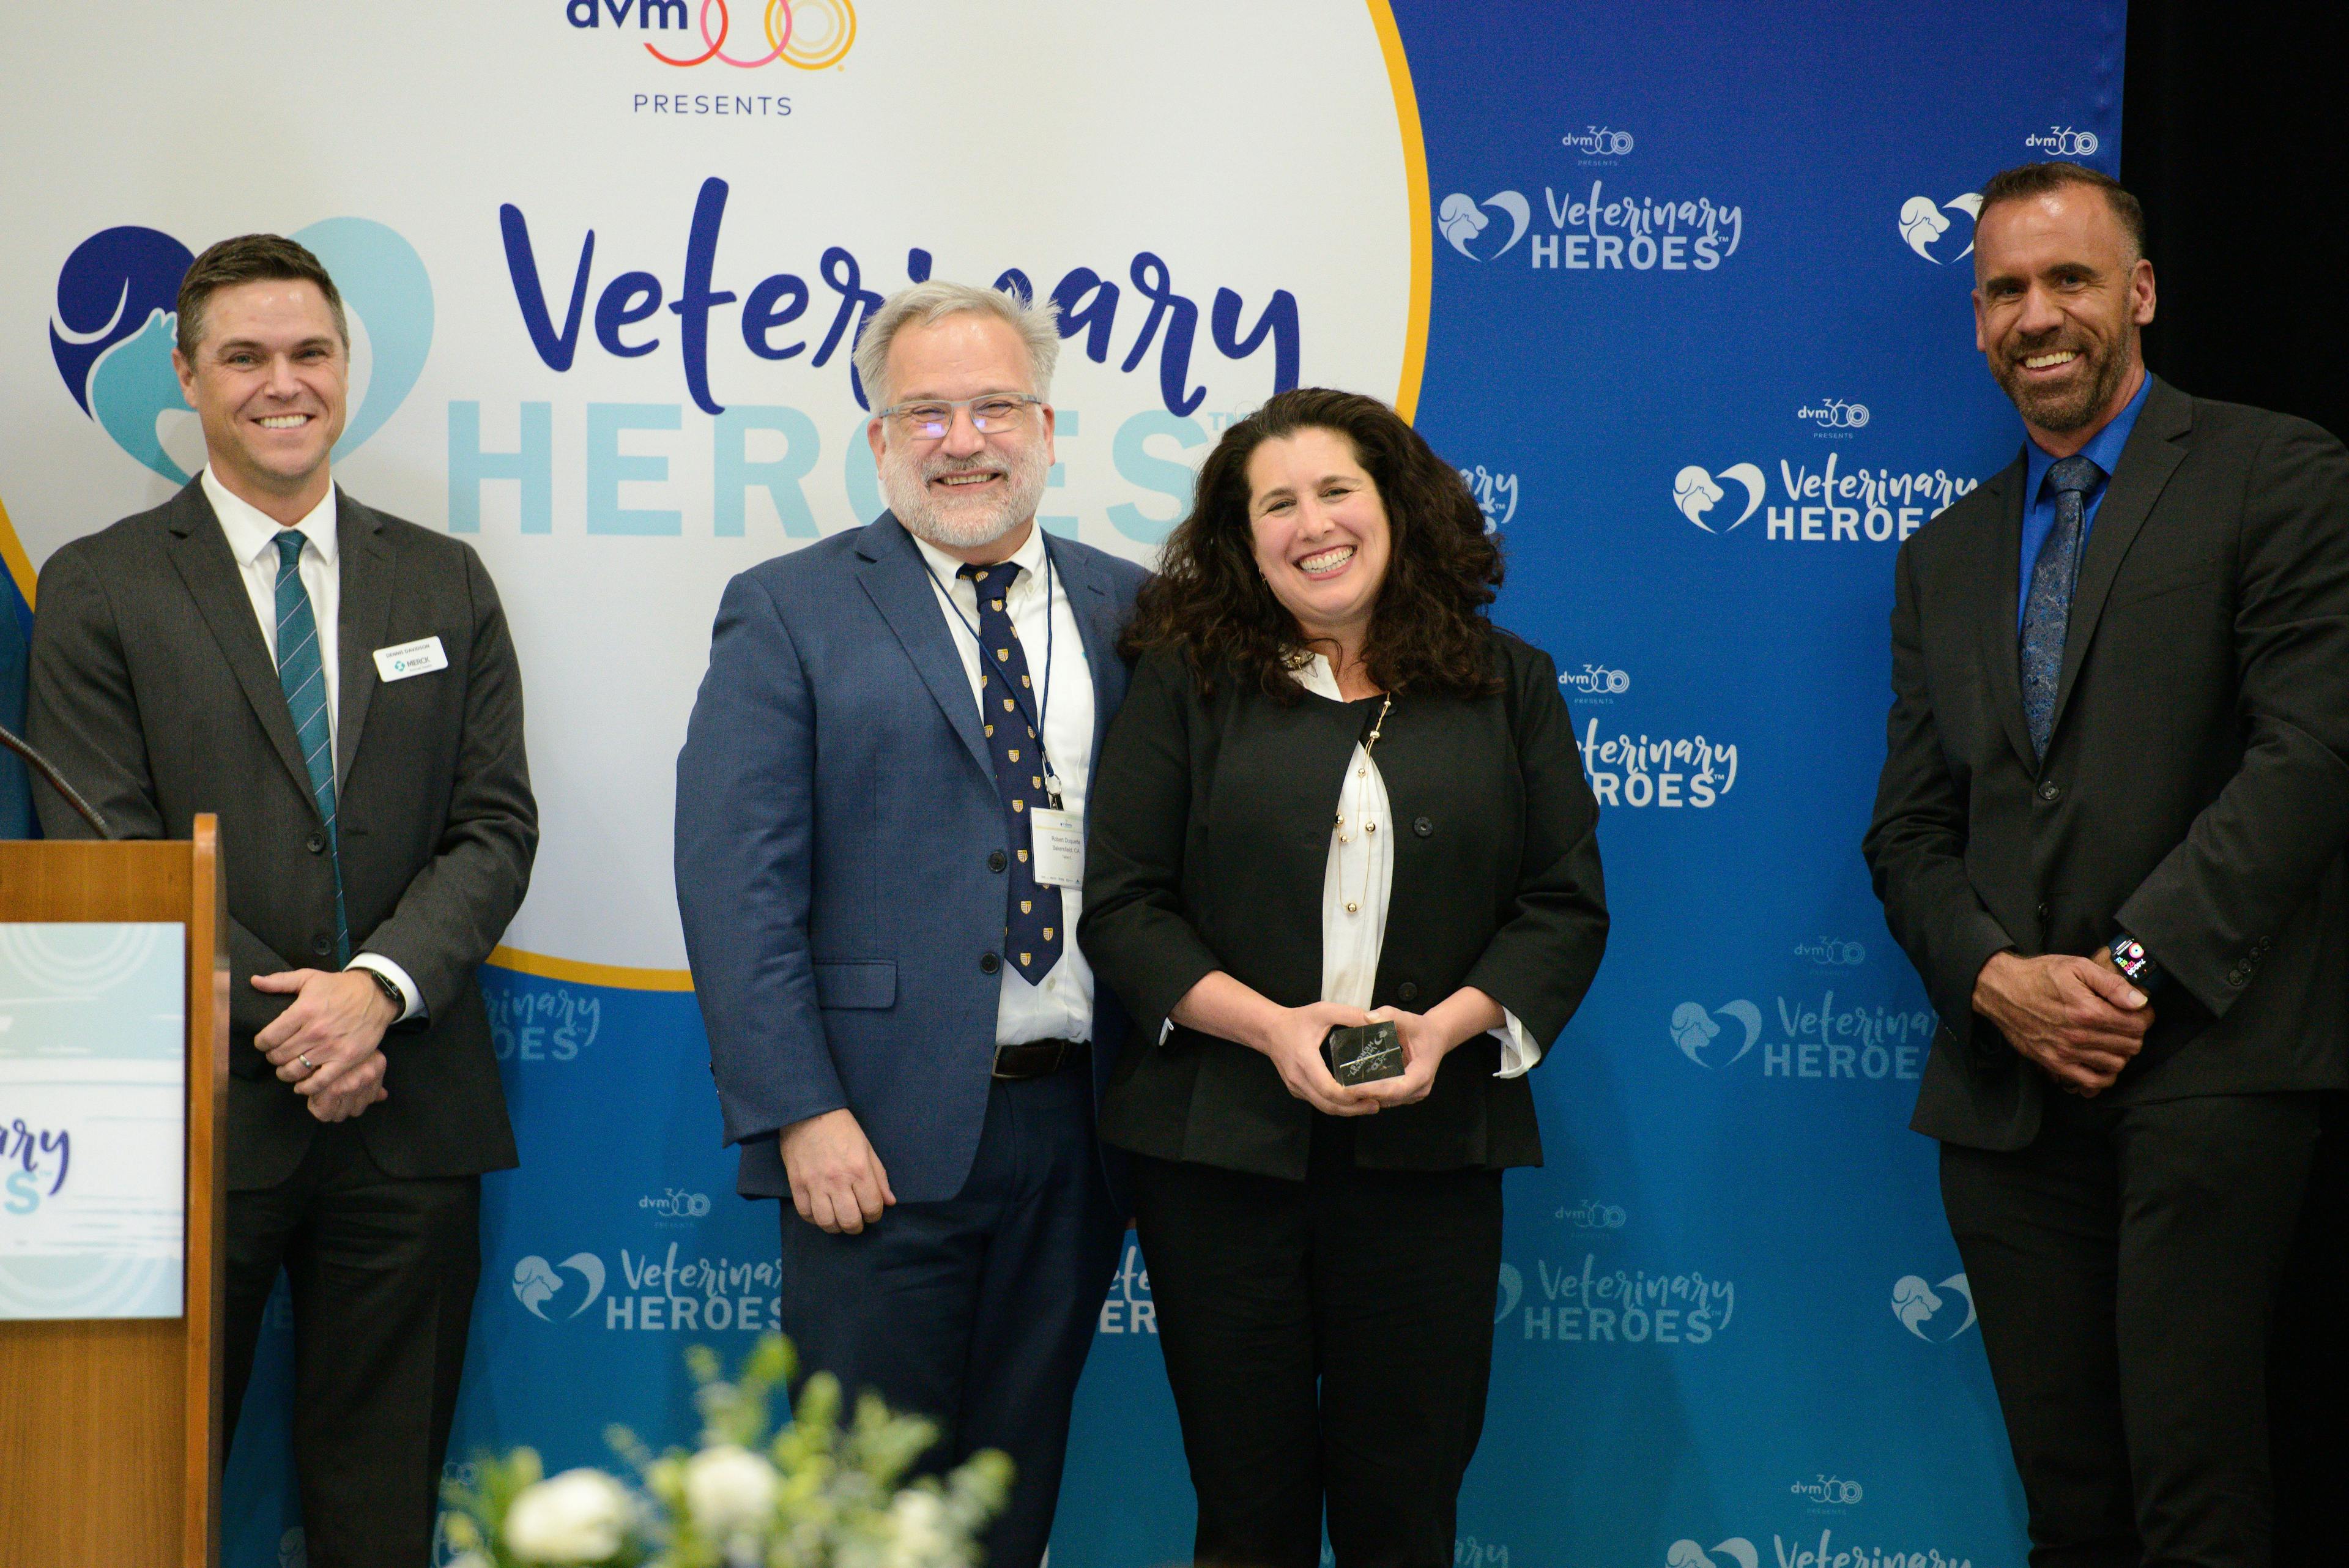 Photo: Jeeheon Cho Photography



Caeley J. Melmed, DVM, DACVIM (SAIM) (right center), receives the Veterinary HeroesTM award for Internal Medicine during a celebratory gala at the Fetch dvm360® Conference in San Diego, California.

